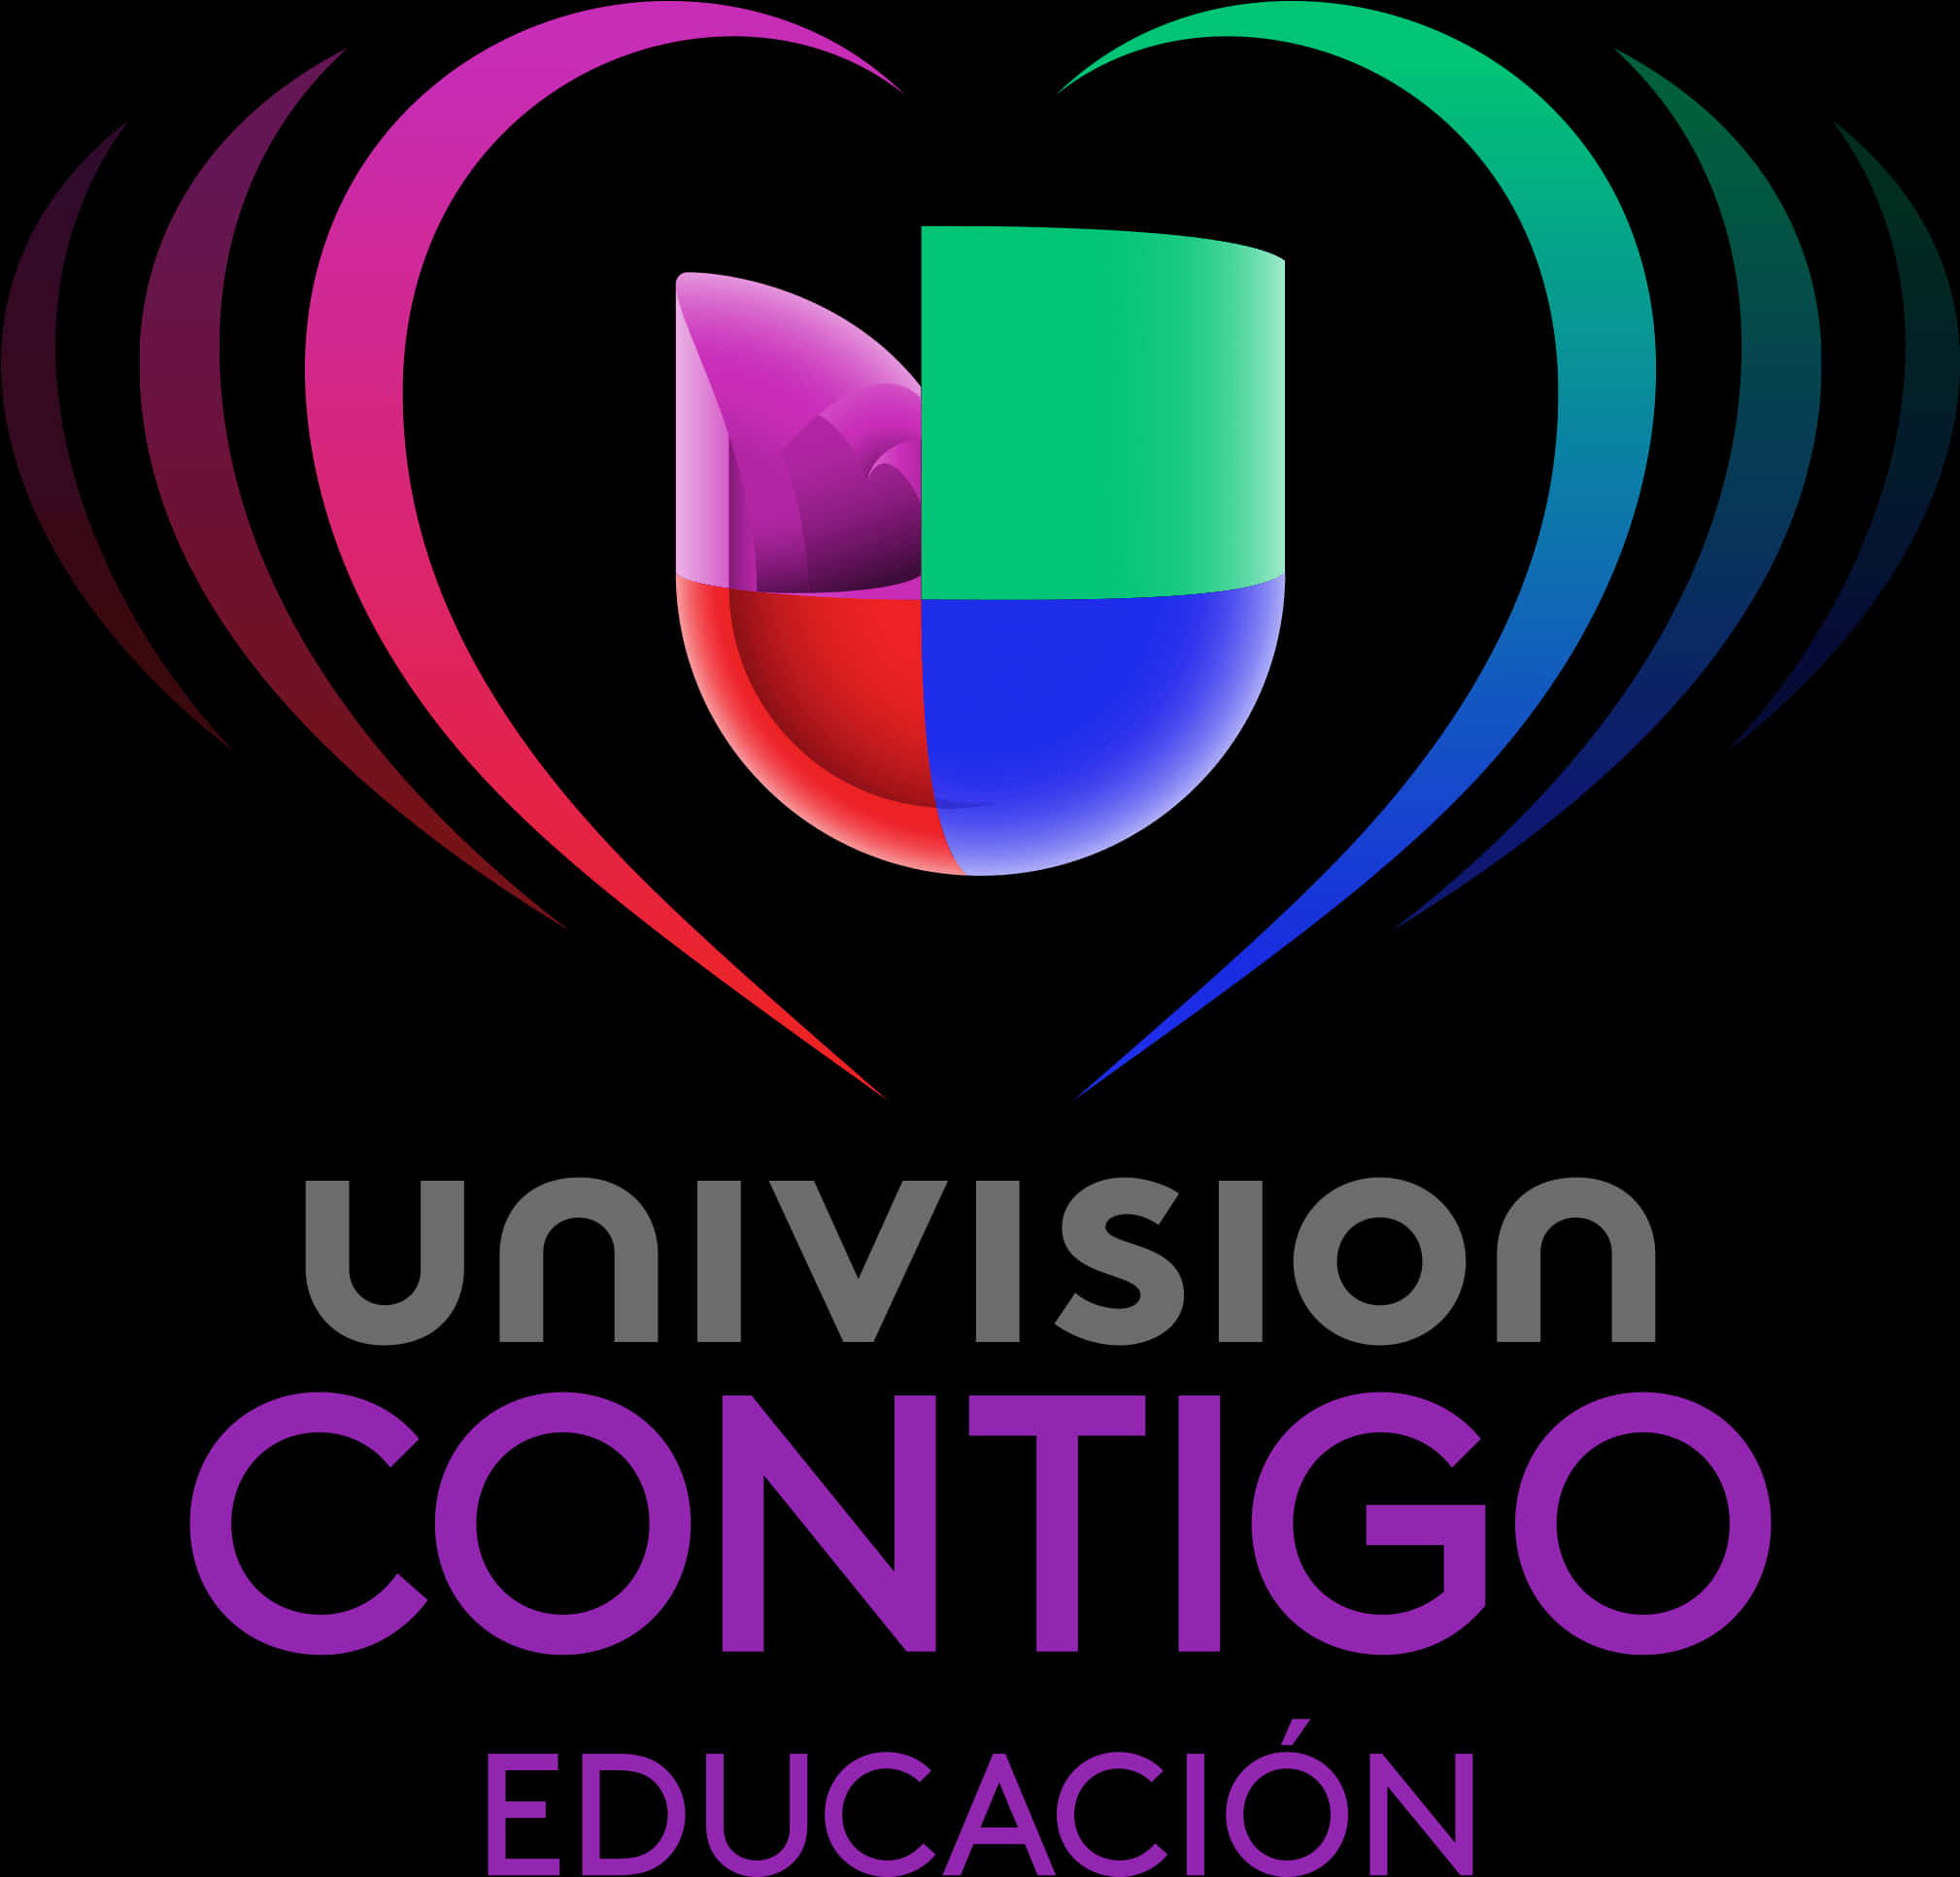 A Logo With Colorful Shapes And Text